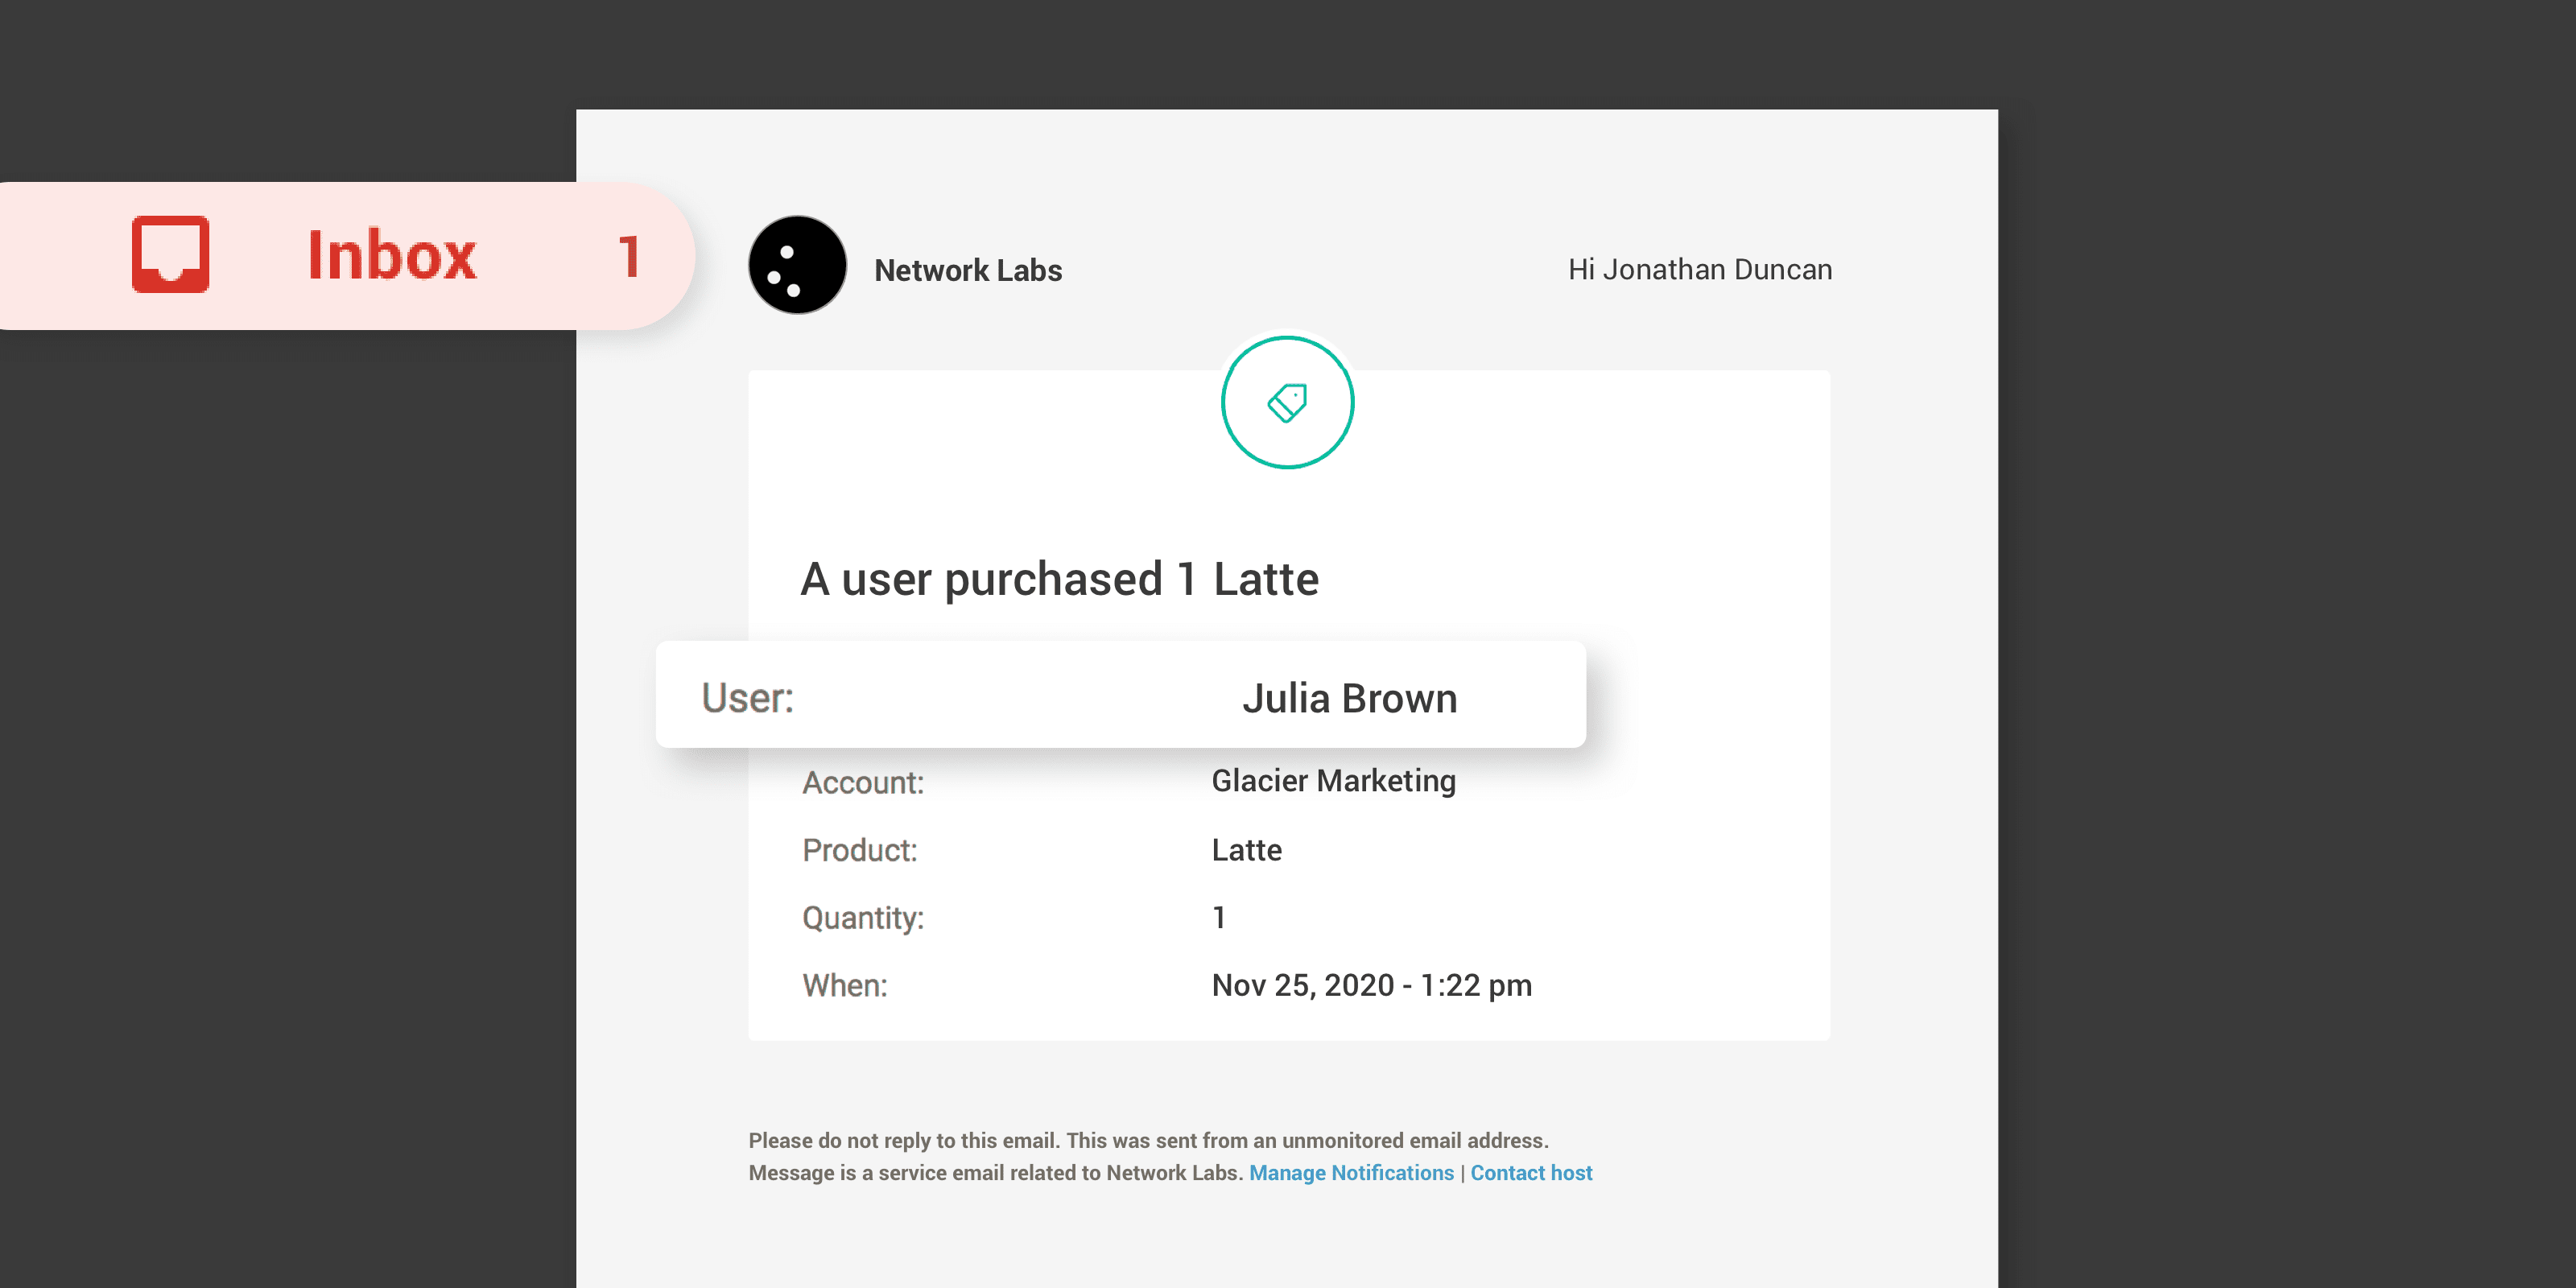 Users who made purchases are included in email notifications